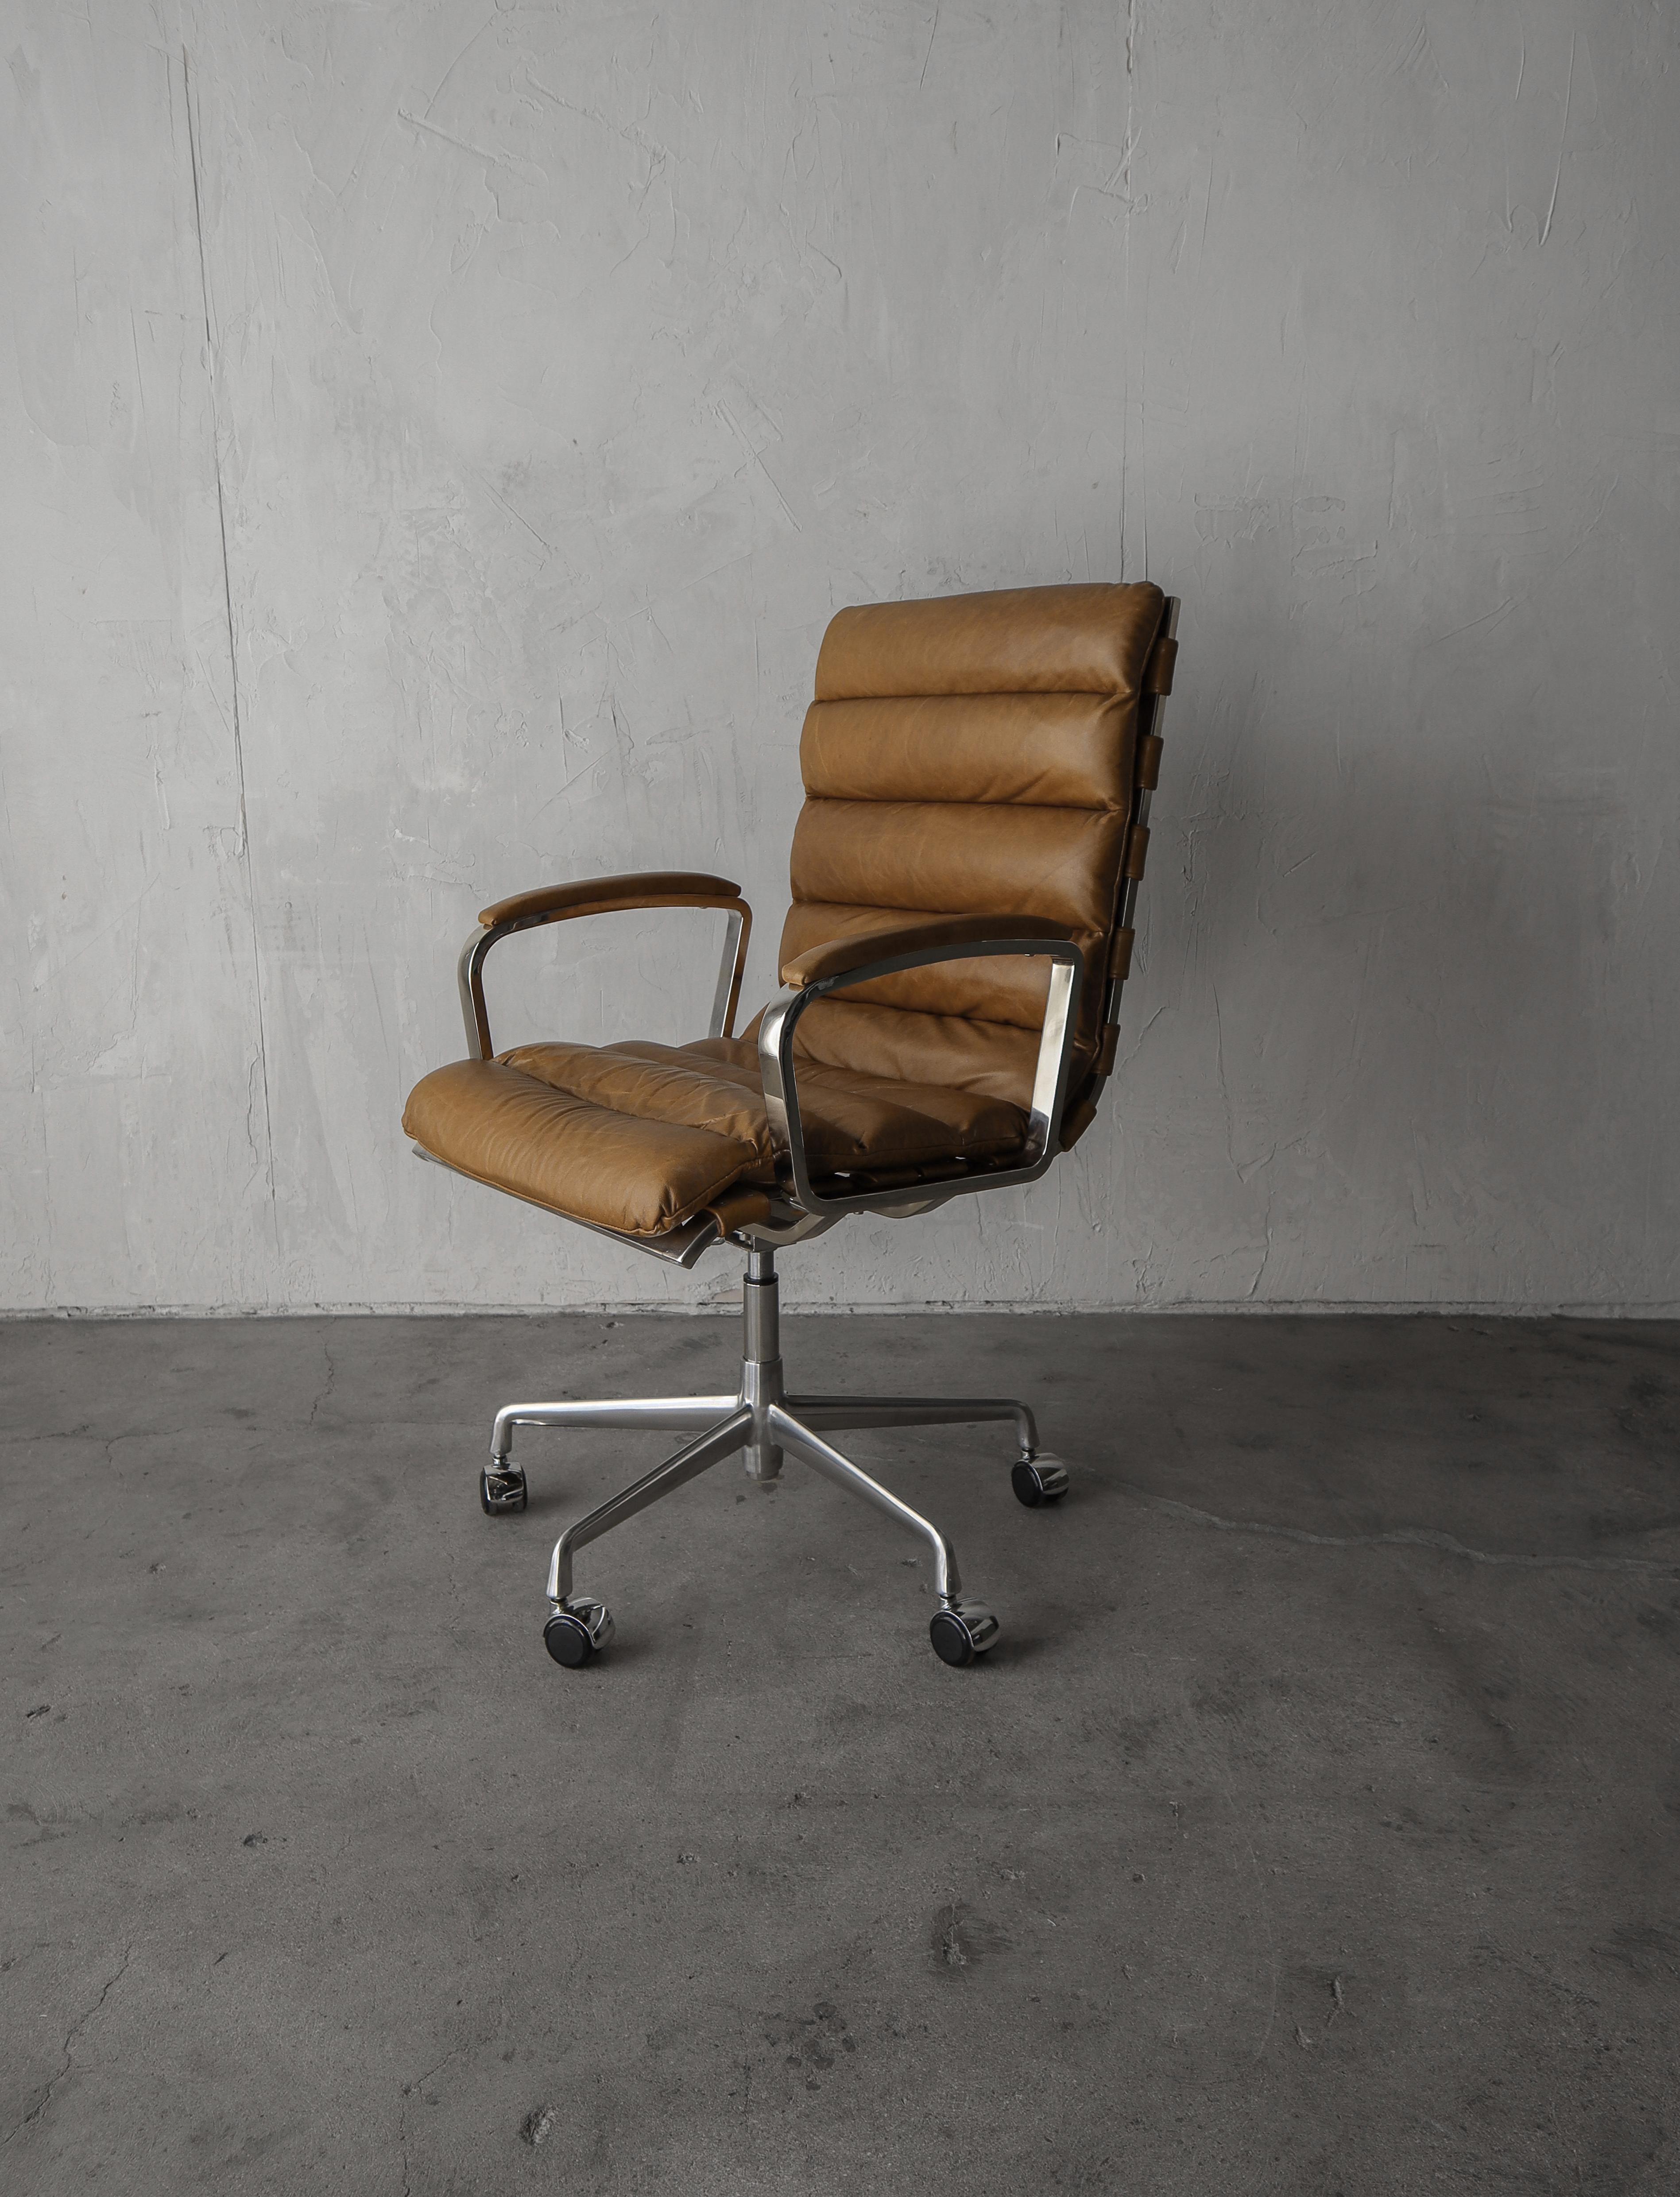 Classic Oviedo Desk Chair by Restoration Hardware (2 STILL AVAILABLE)

These gorgeous chairs pull their design from mid century classics.  The gorgeous channeled, perfectly patinated Berkshire leather seat and straps, bright chrome, fully height